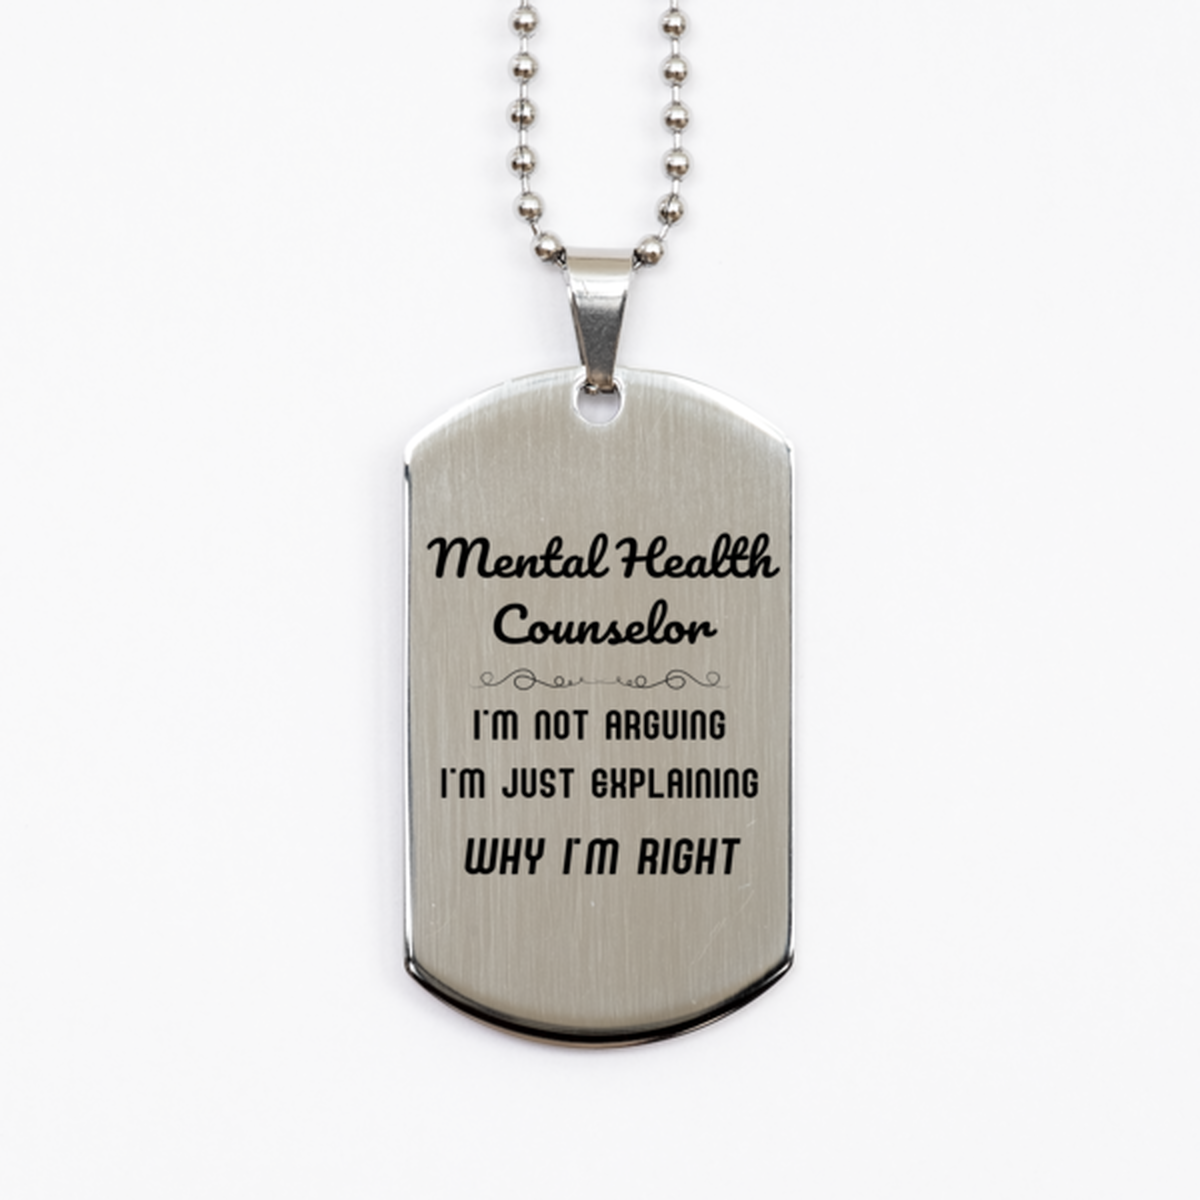 Mental Health Counselor I'm not Arguing. I'm Just Explaining Why I'm RIGHT Silver Dog Tag, Funny Saying Quote Mental Health Counselor Gifts For Mental Health Counselor Graduation Birthday Christmas Gifts for Men Women Coworker